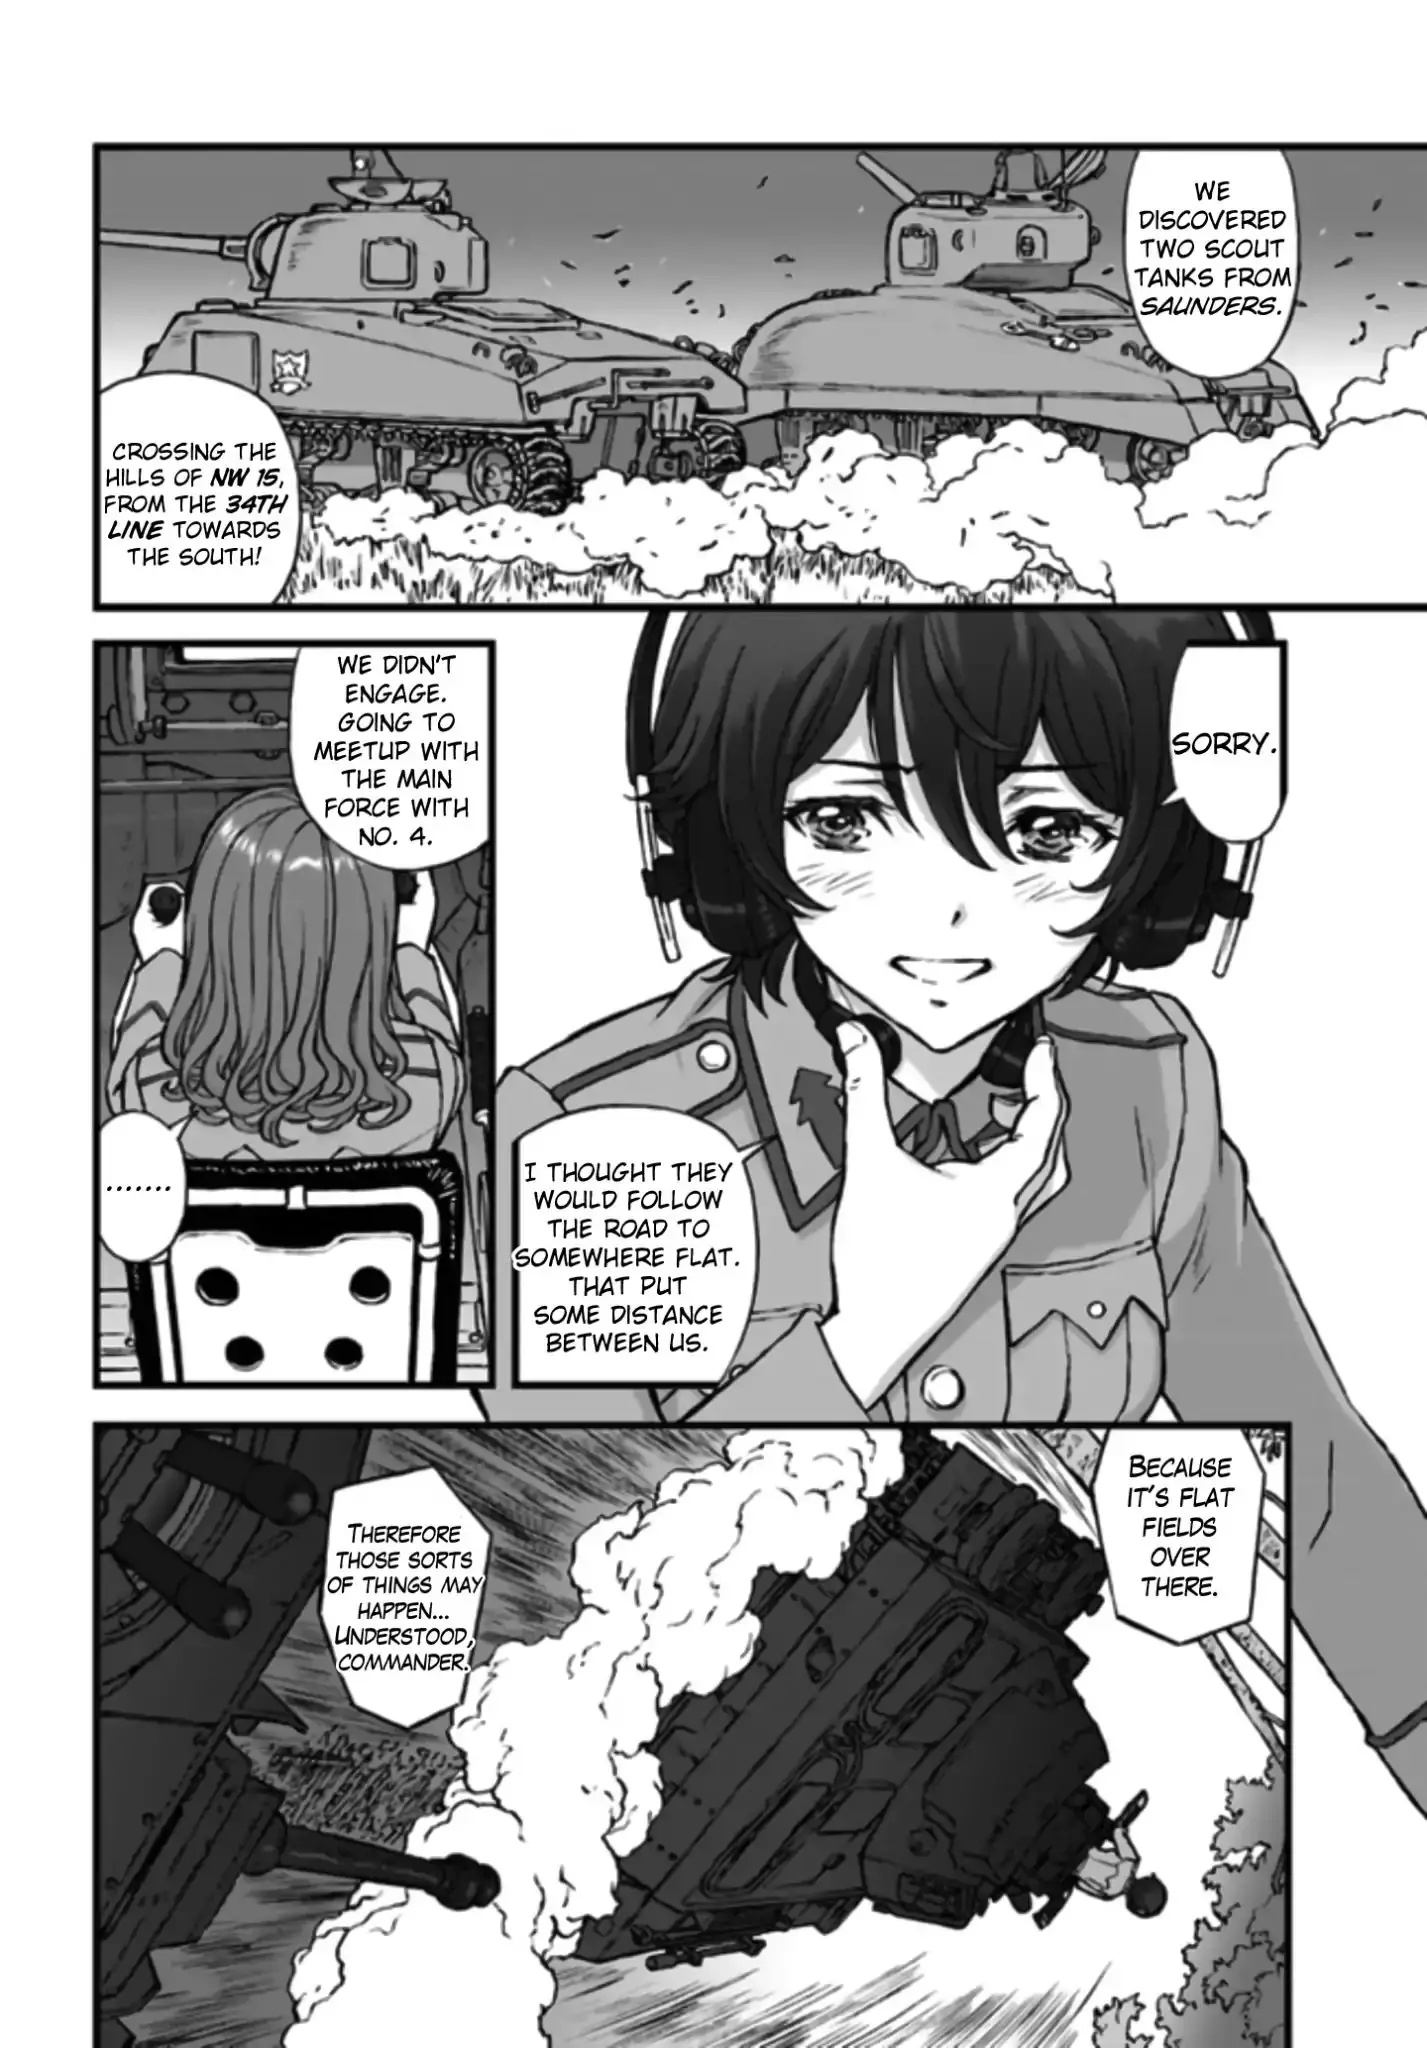 Girls Und Panzer - The Fir Tree And The Iron-Winged Witch - 1 page 11